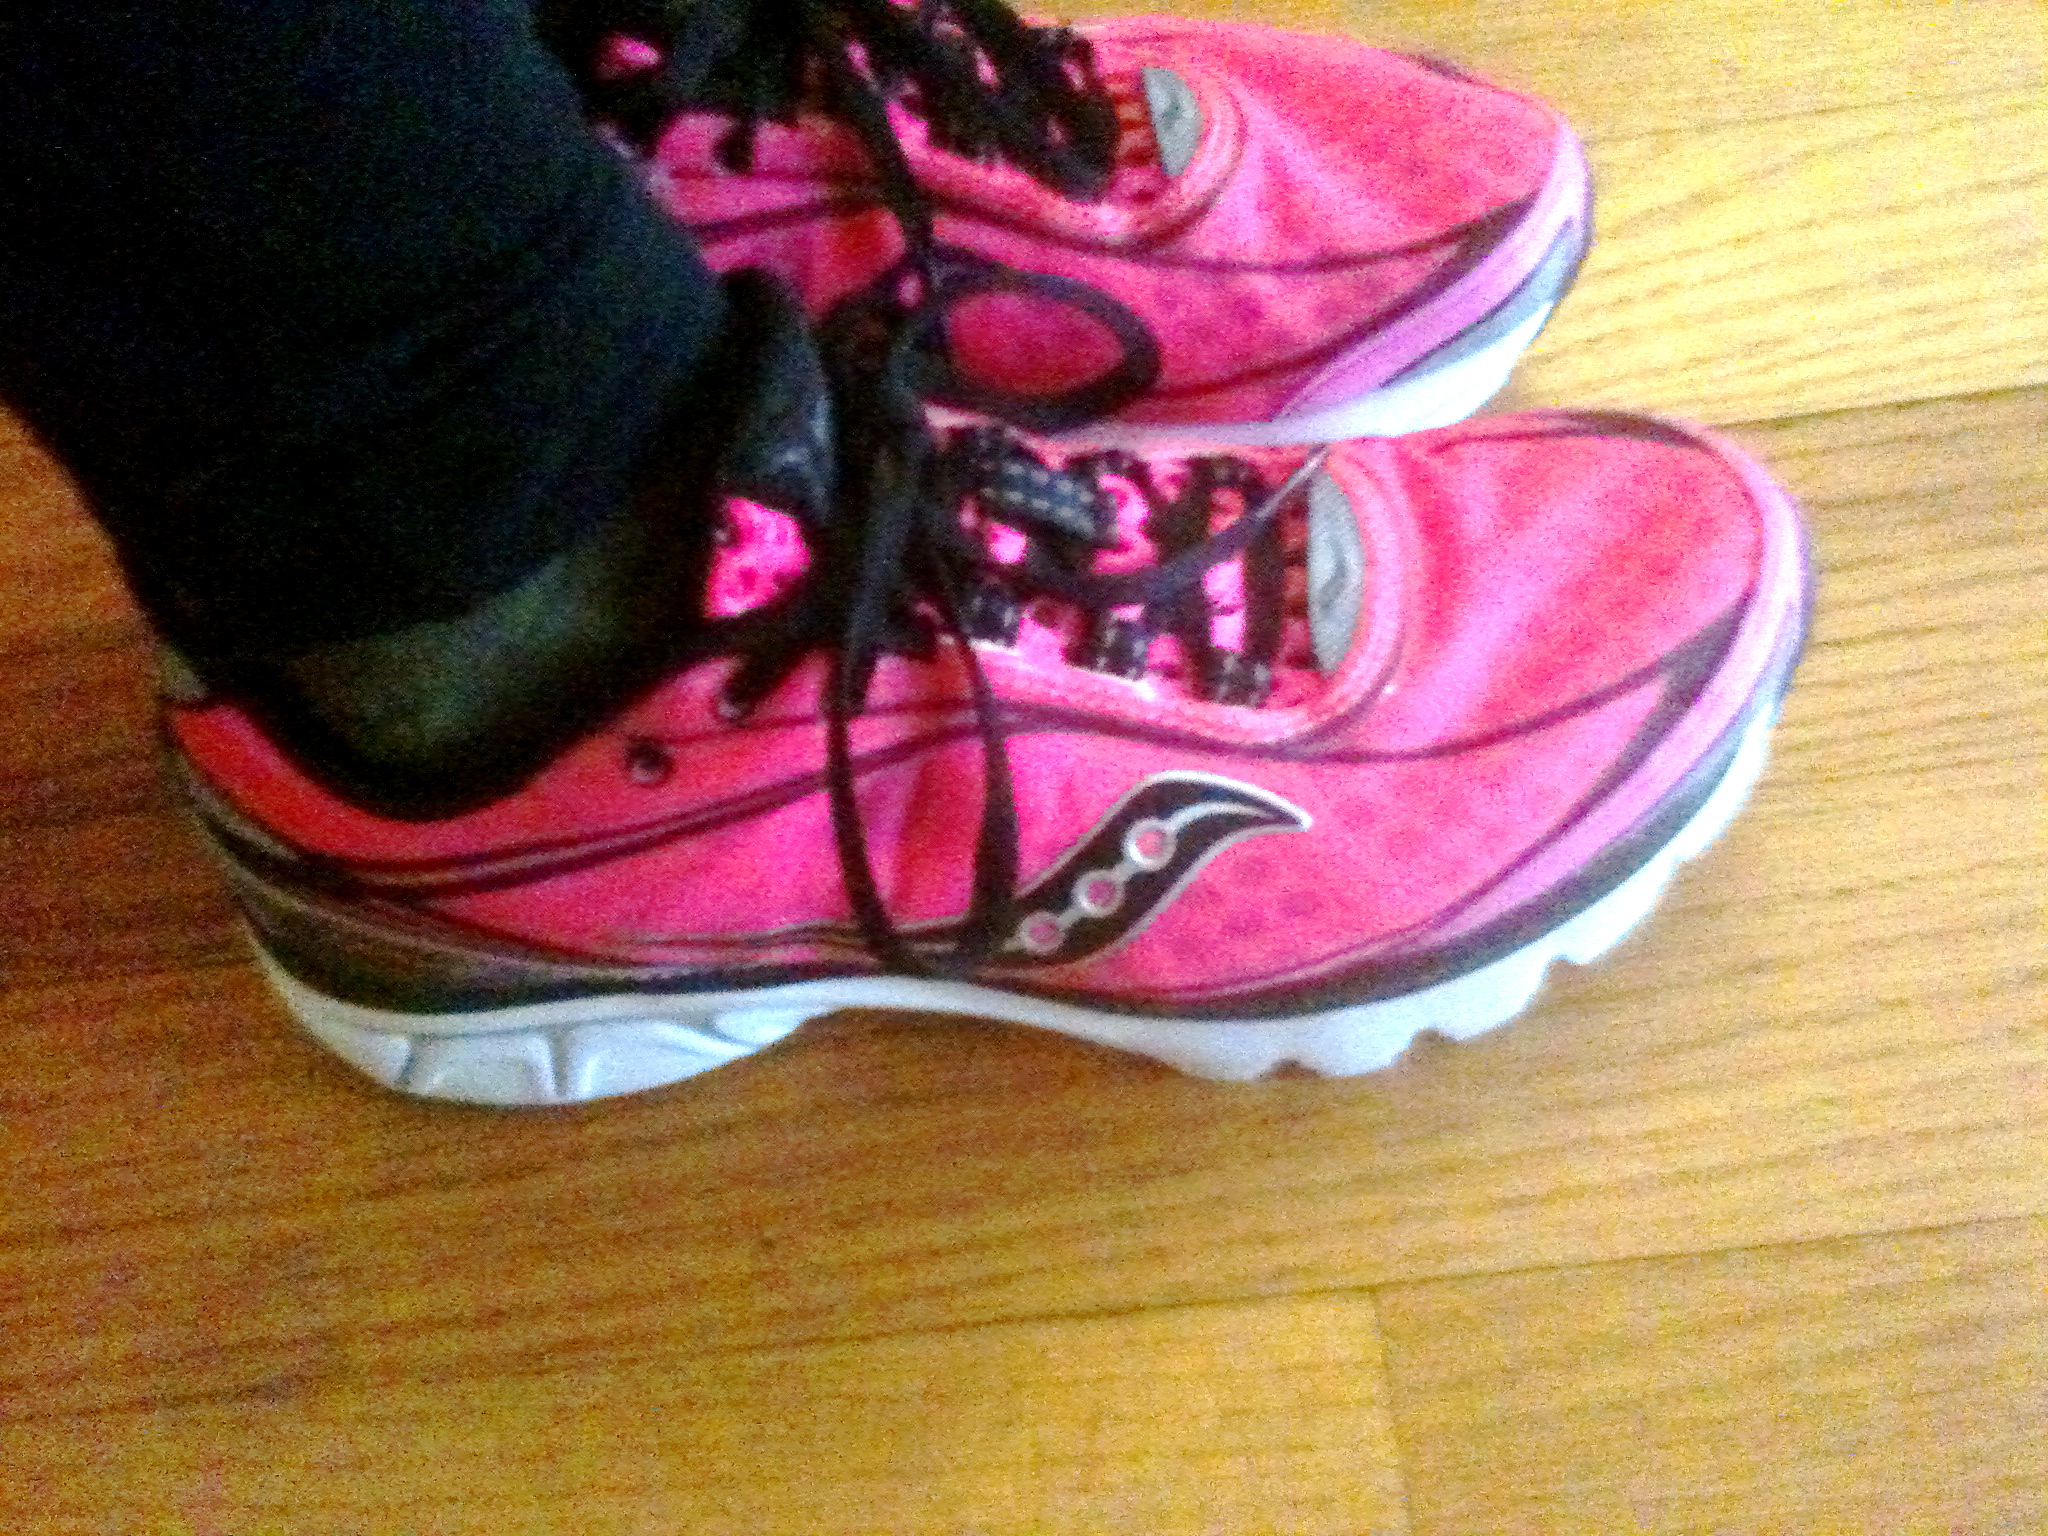 pink saucony shoes